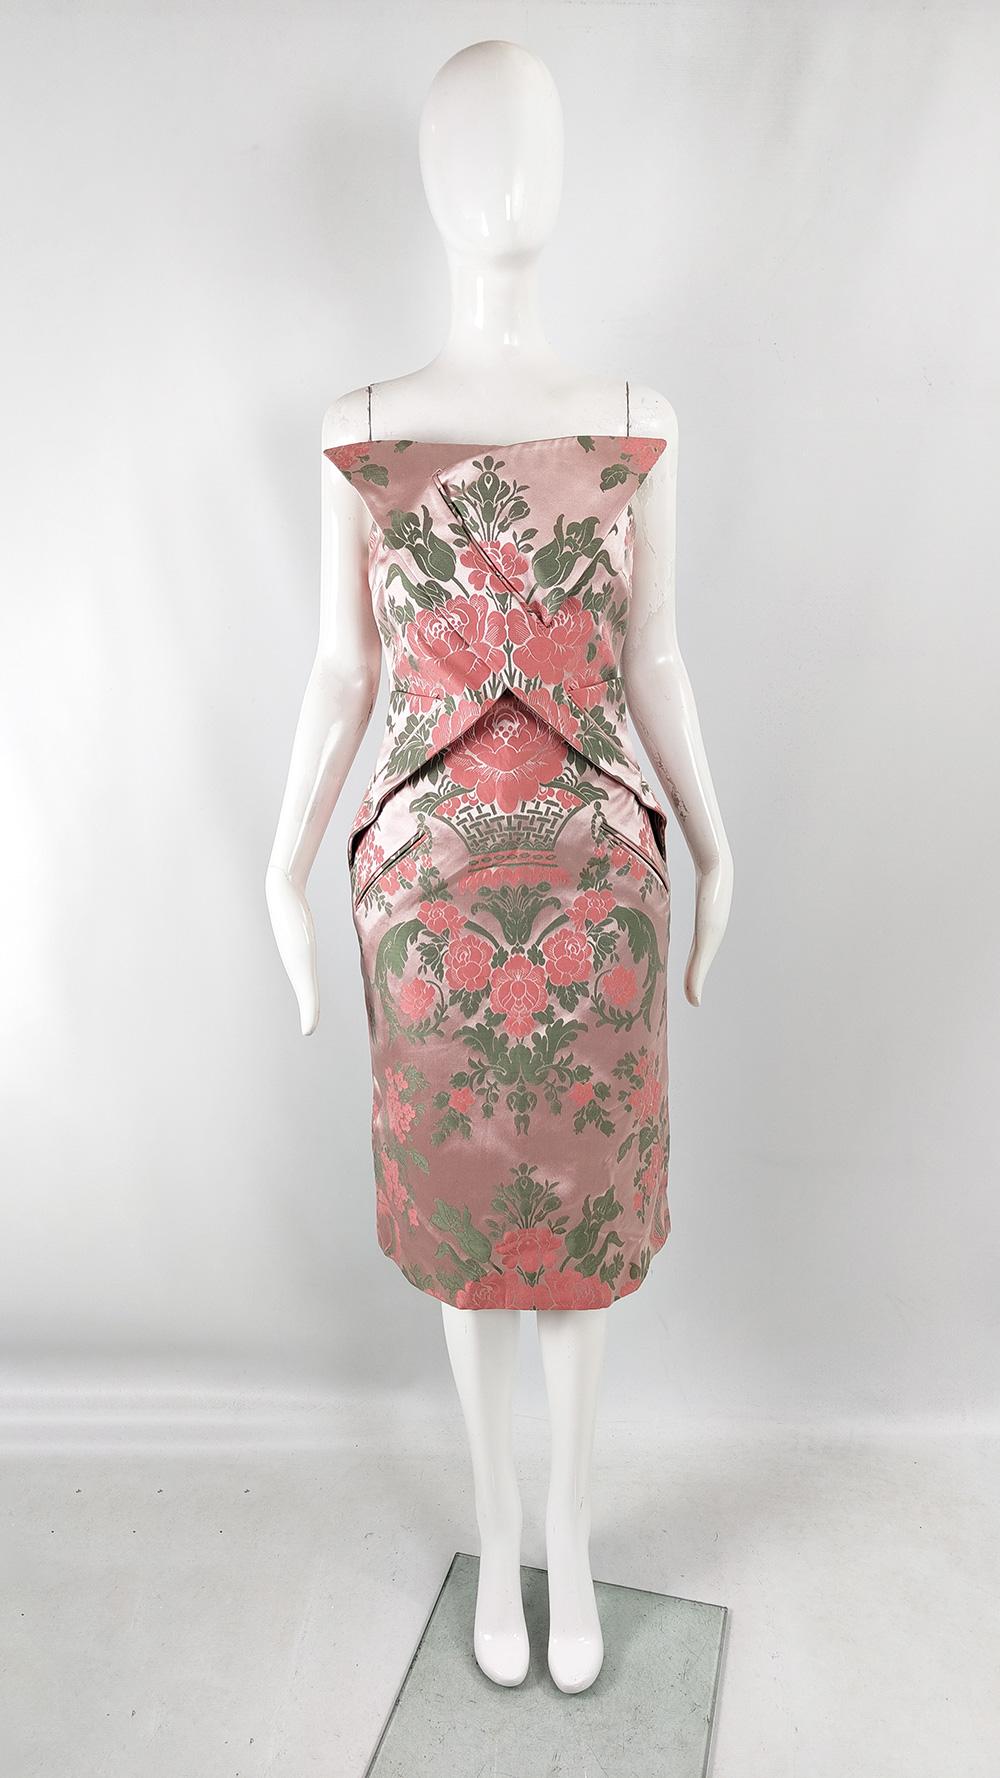 Size: Marked IT 44 / UK 12 / US 8
Bust - 35” / 89cm
Waist - 30” / 76cm
Hips - 40” / 101cm
Length (Bust to Hem) - 34” / 86cm

An incredible strapless Christopher Kane Dress in a pink silk and cotton satin with an architectural pointed design at the